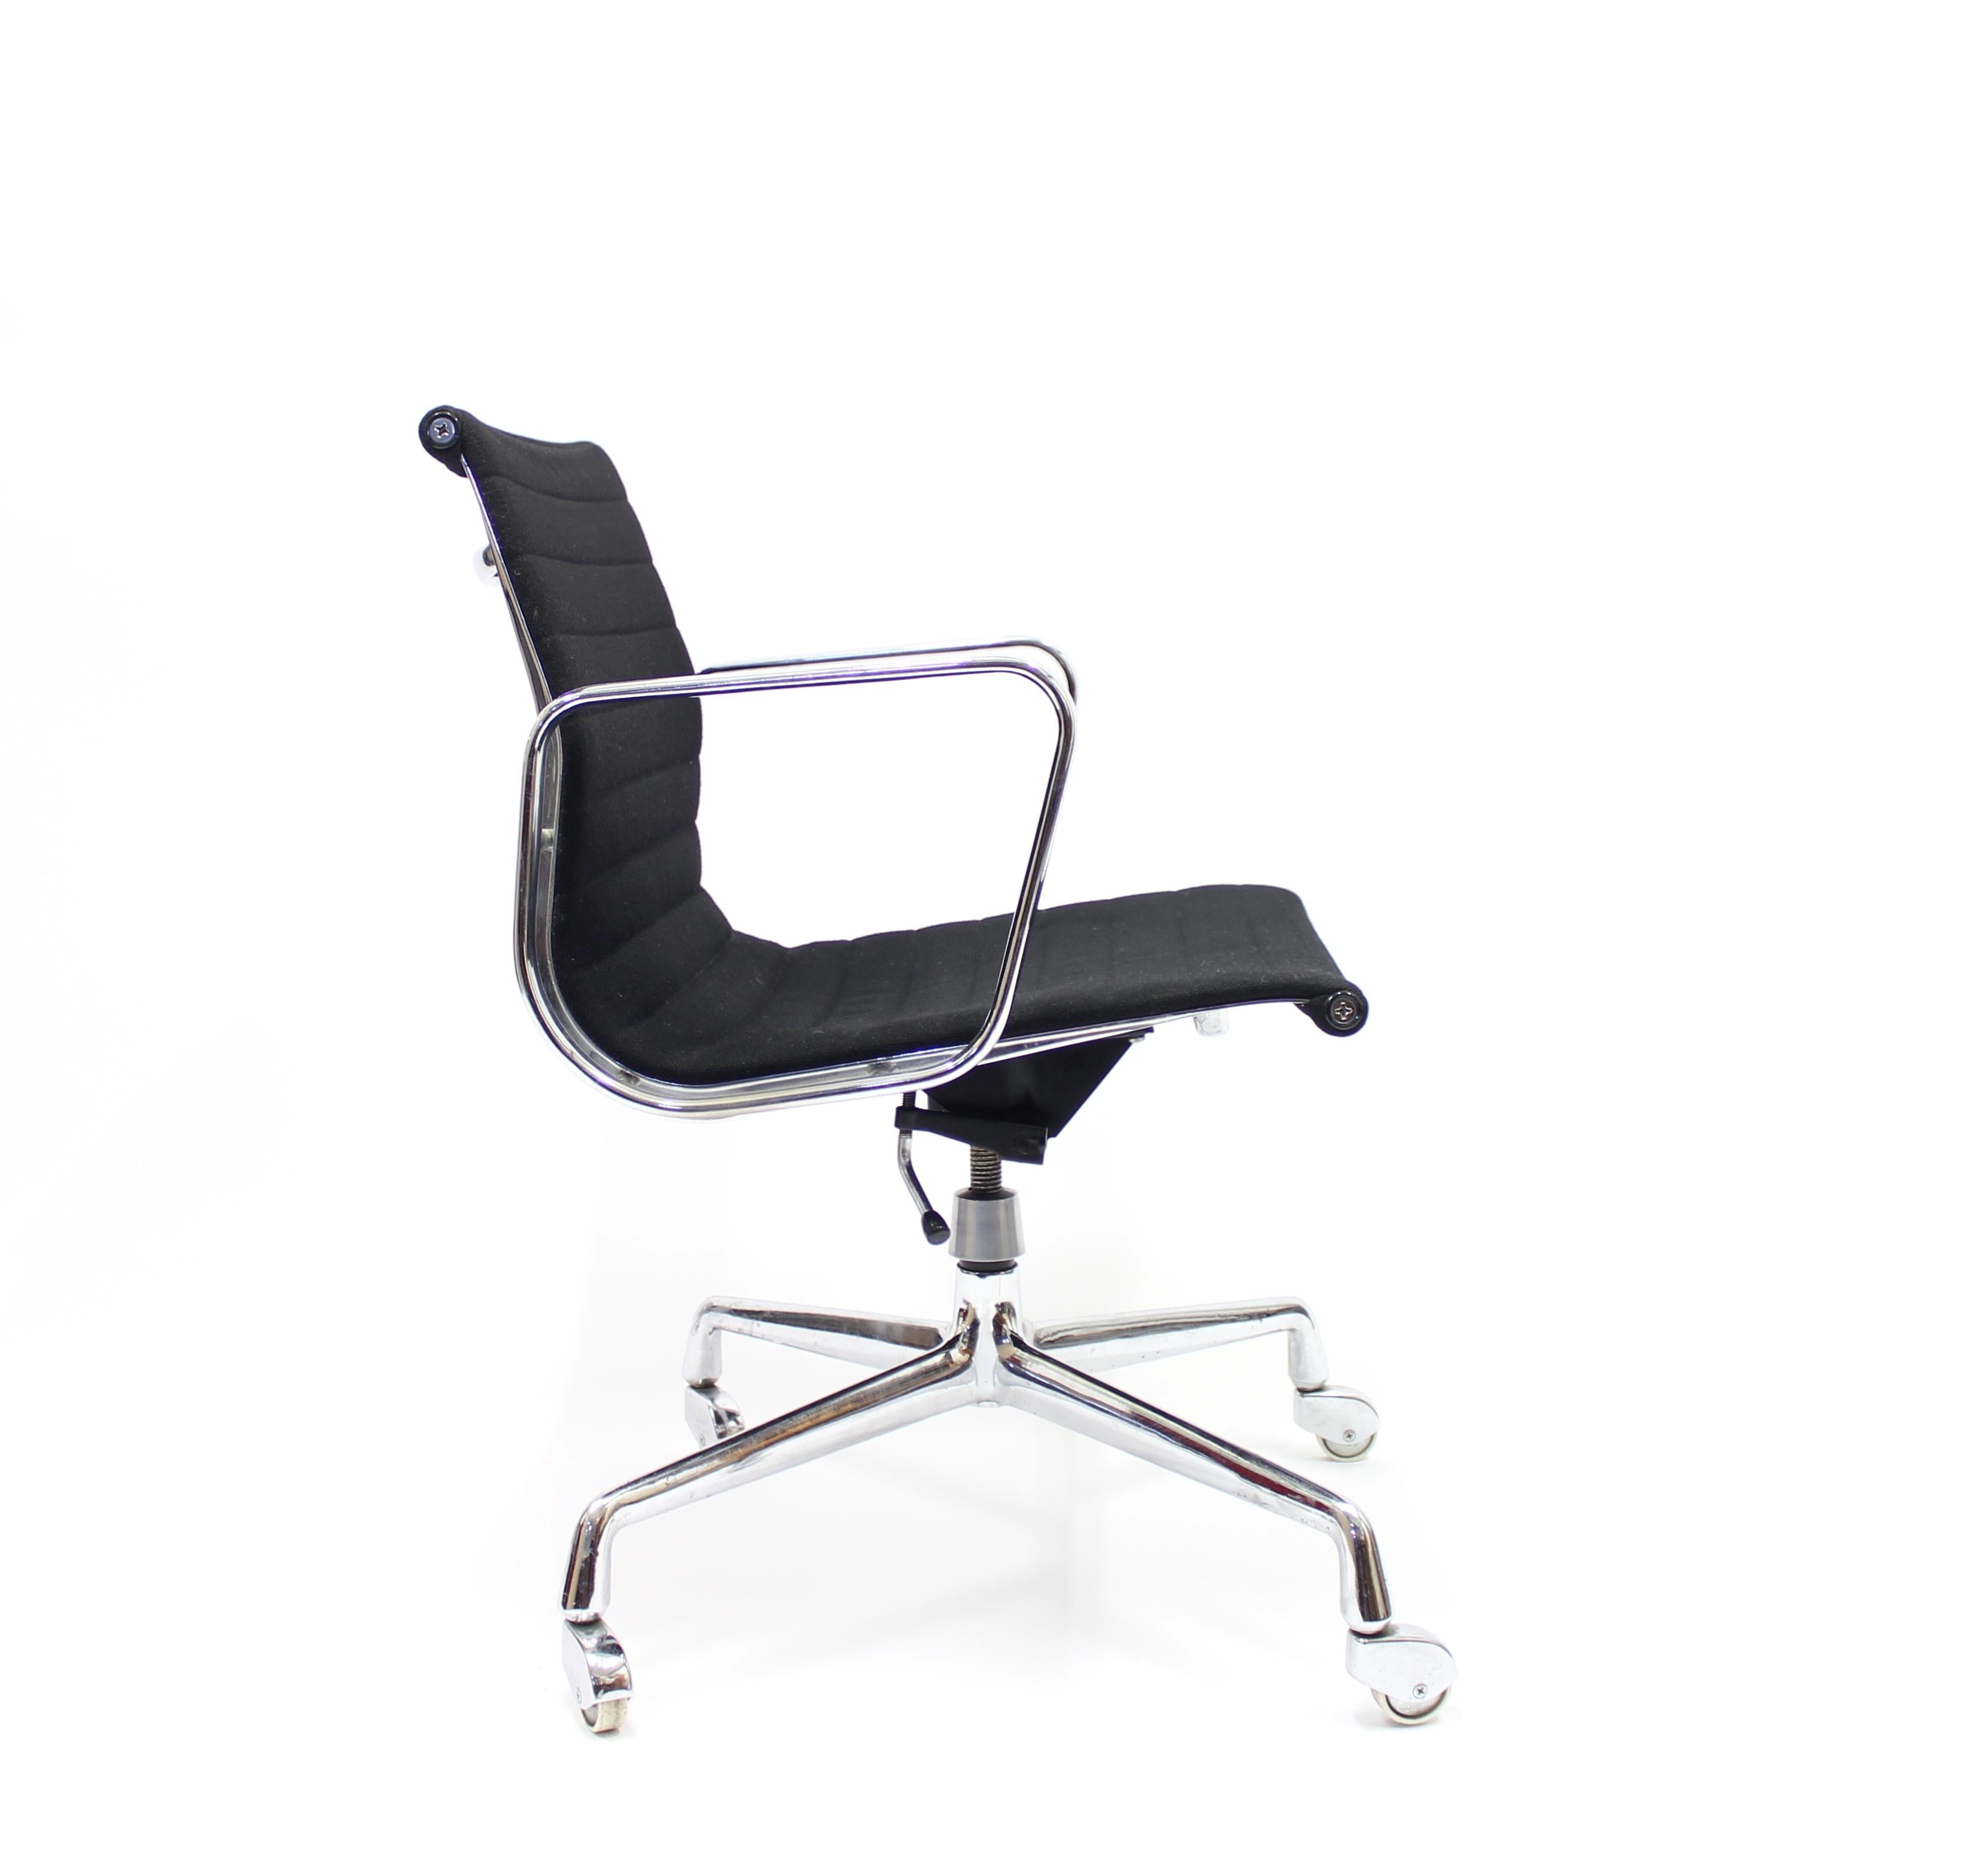 Mid-20th Century Vintage EA 117 Office Chair by Charles and Ray Eames for Herman Miller, 1958